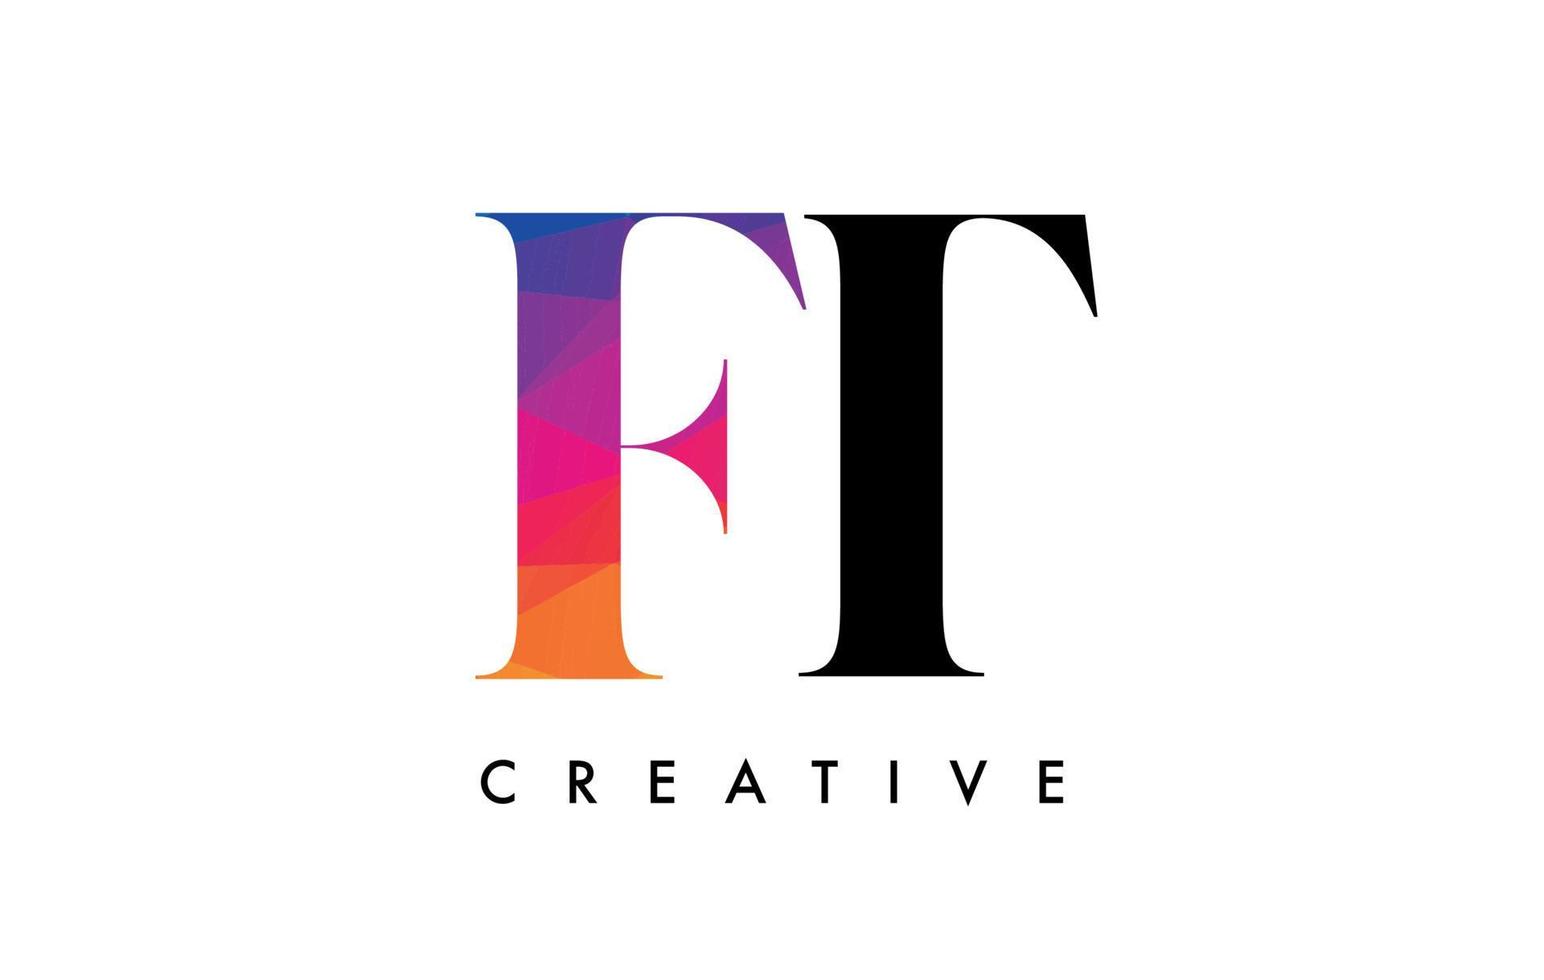 FT Letter Design with Creative Cut and Colorful Rainbow Texture vector